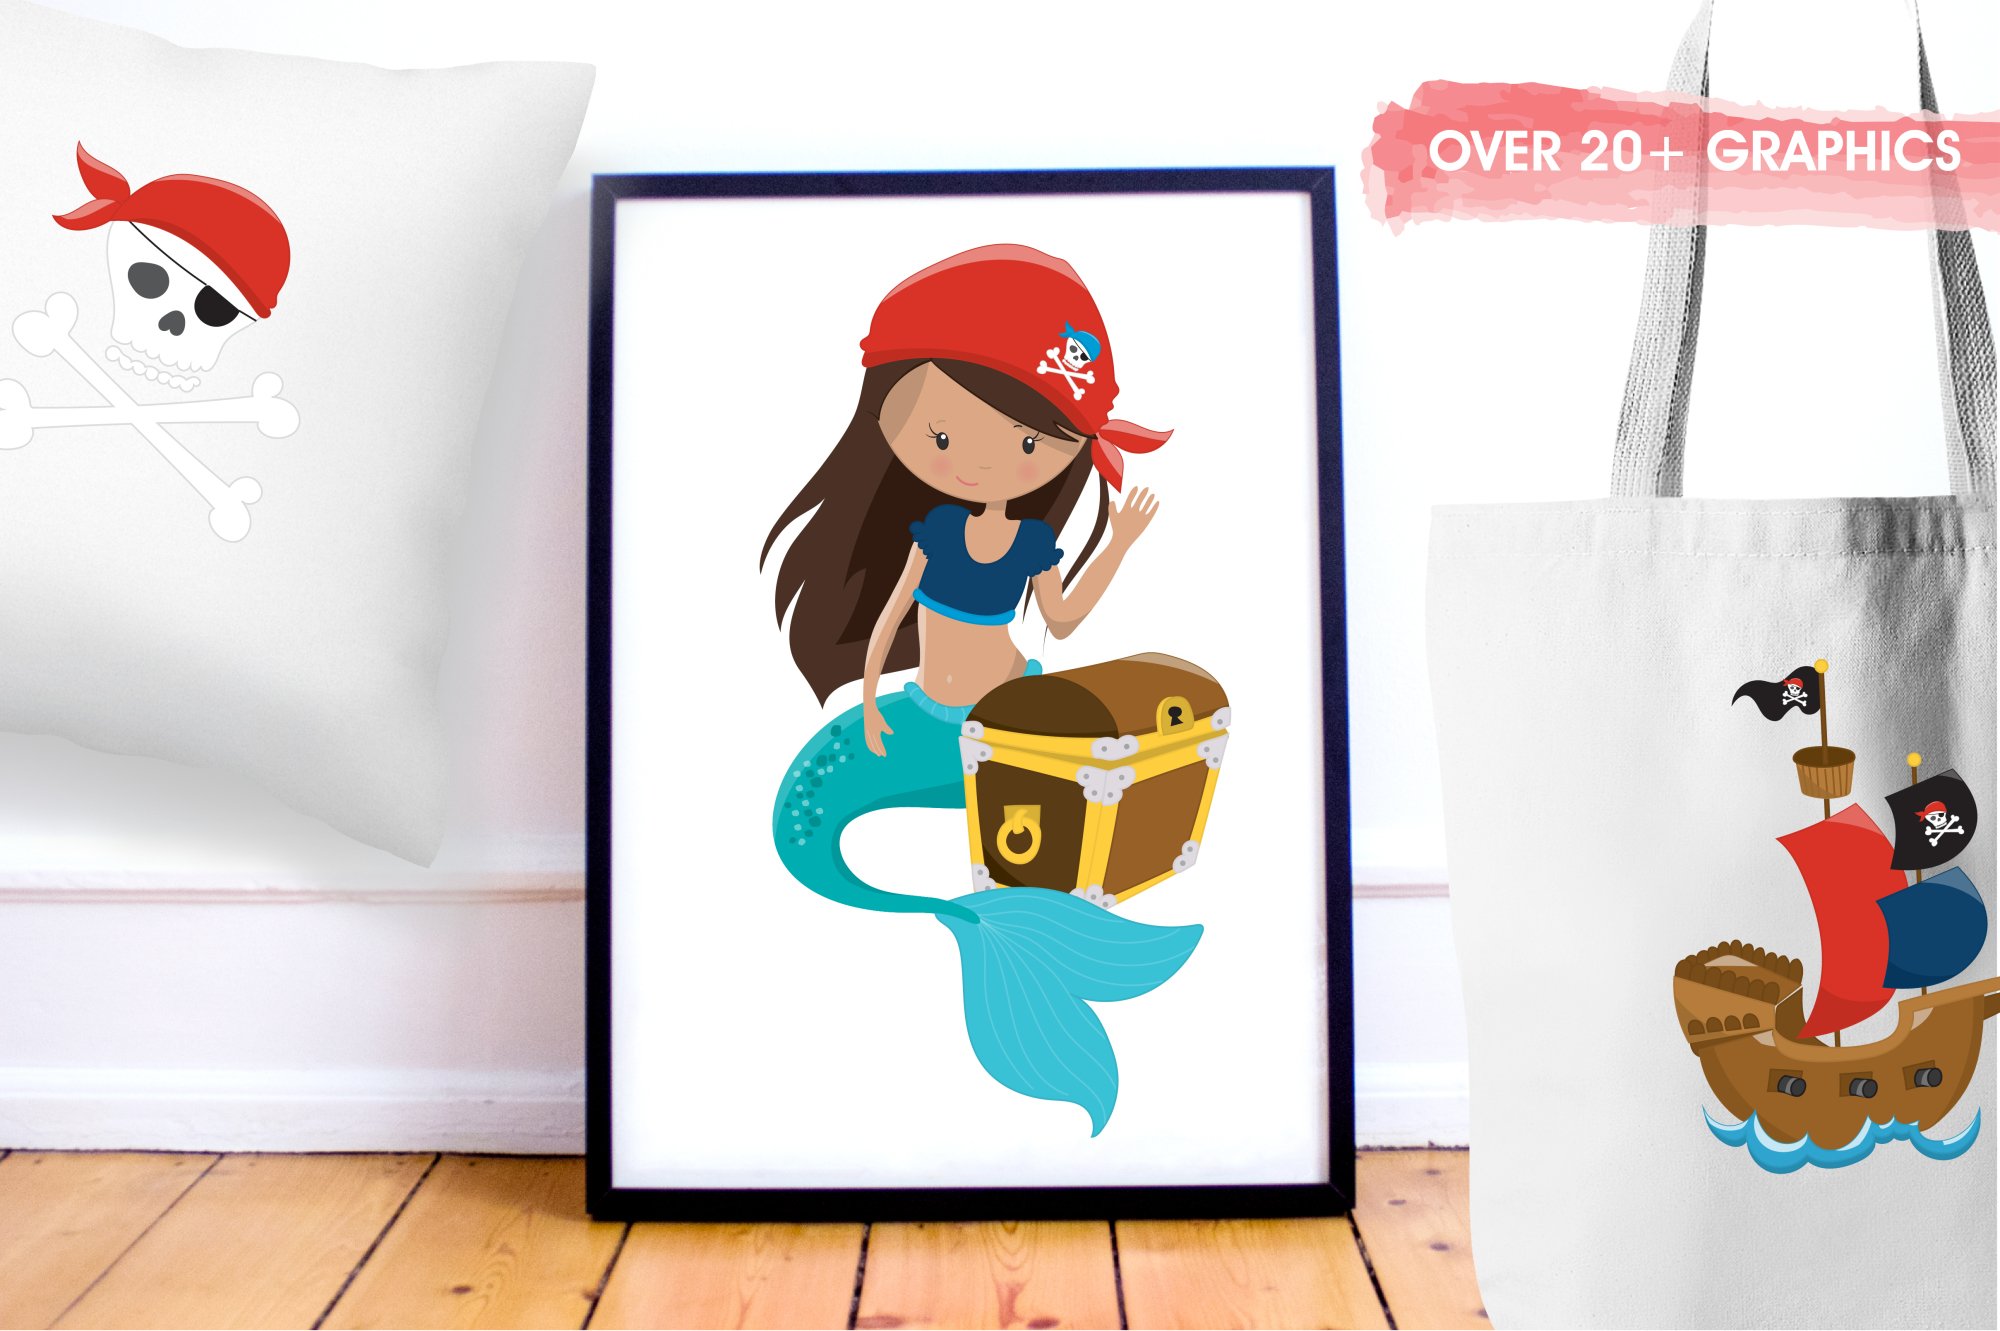 Mermaid in a pirate's look on a poster.